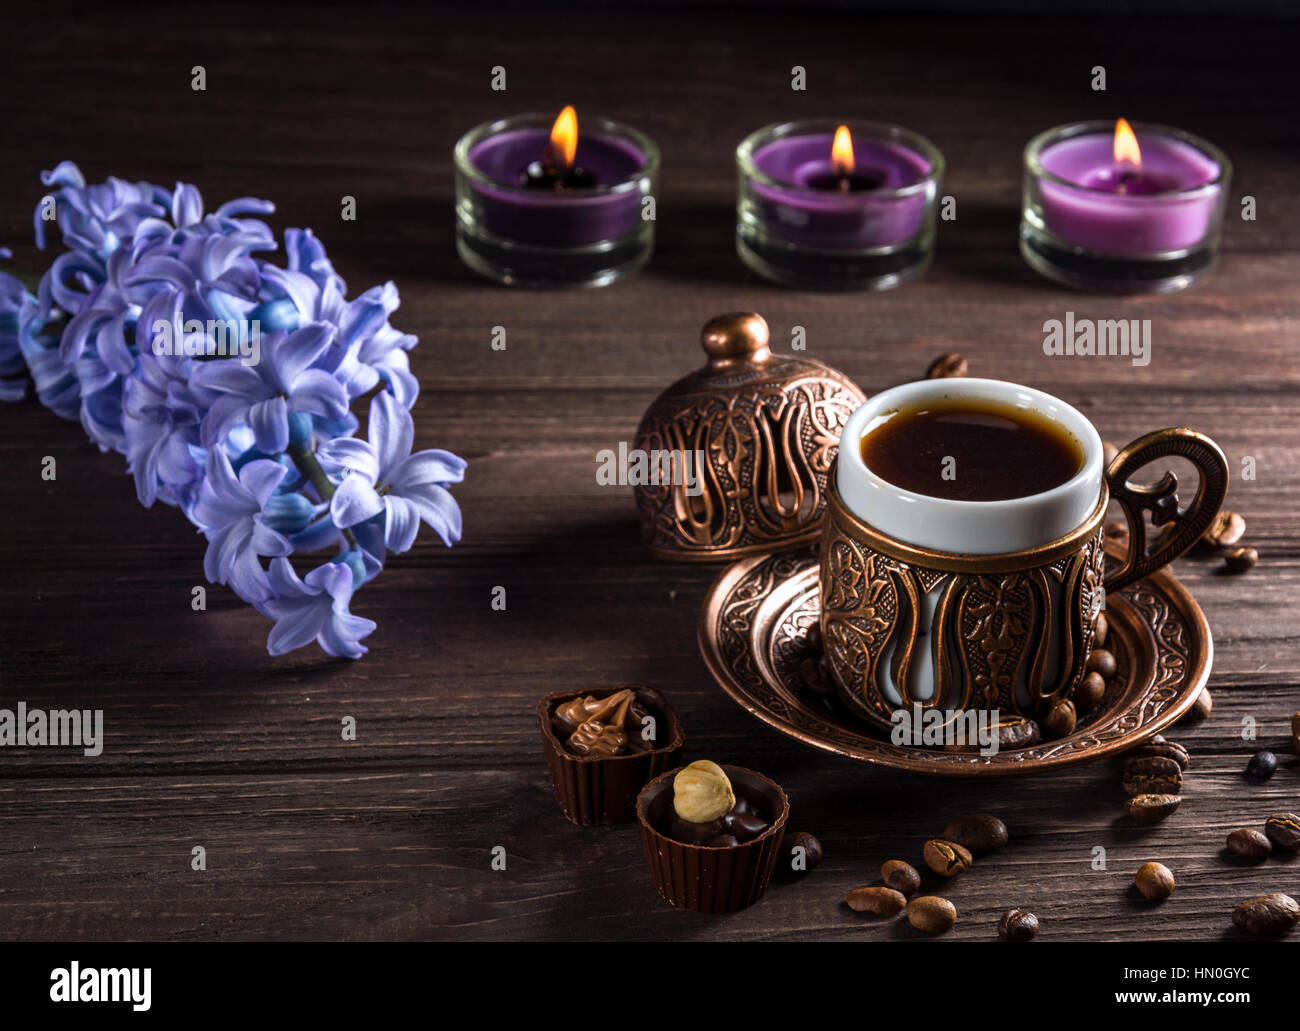 Cup of black coffee, candles and flowers on a wooden background. Dark key. Stock Photo